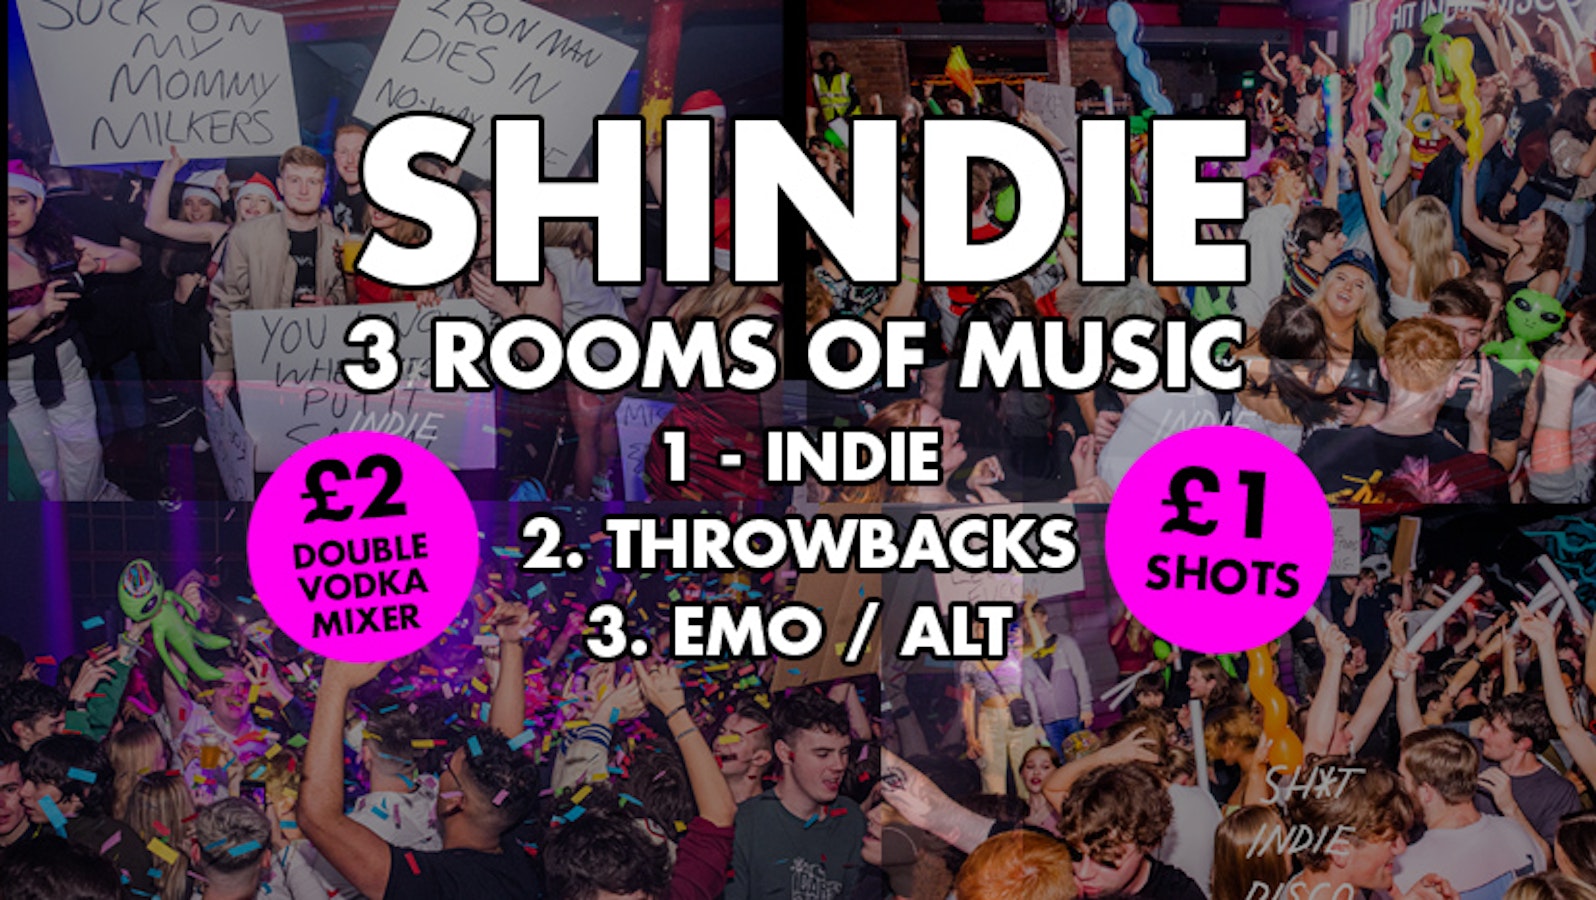 SHINDIE – Shit Indie Disco – “Liverpool’s Biggest Thursday Student Night” – £2 double vodka / gin & mixer – THREE ROOMS of Music – Indie / Throwback Chart and Pop / Emo / Dance